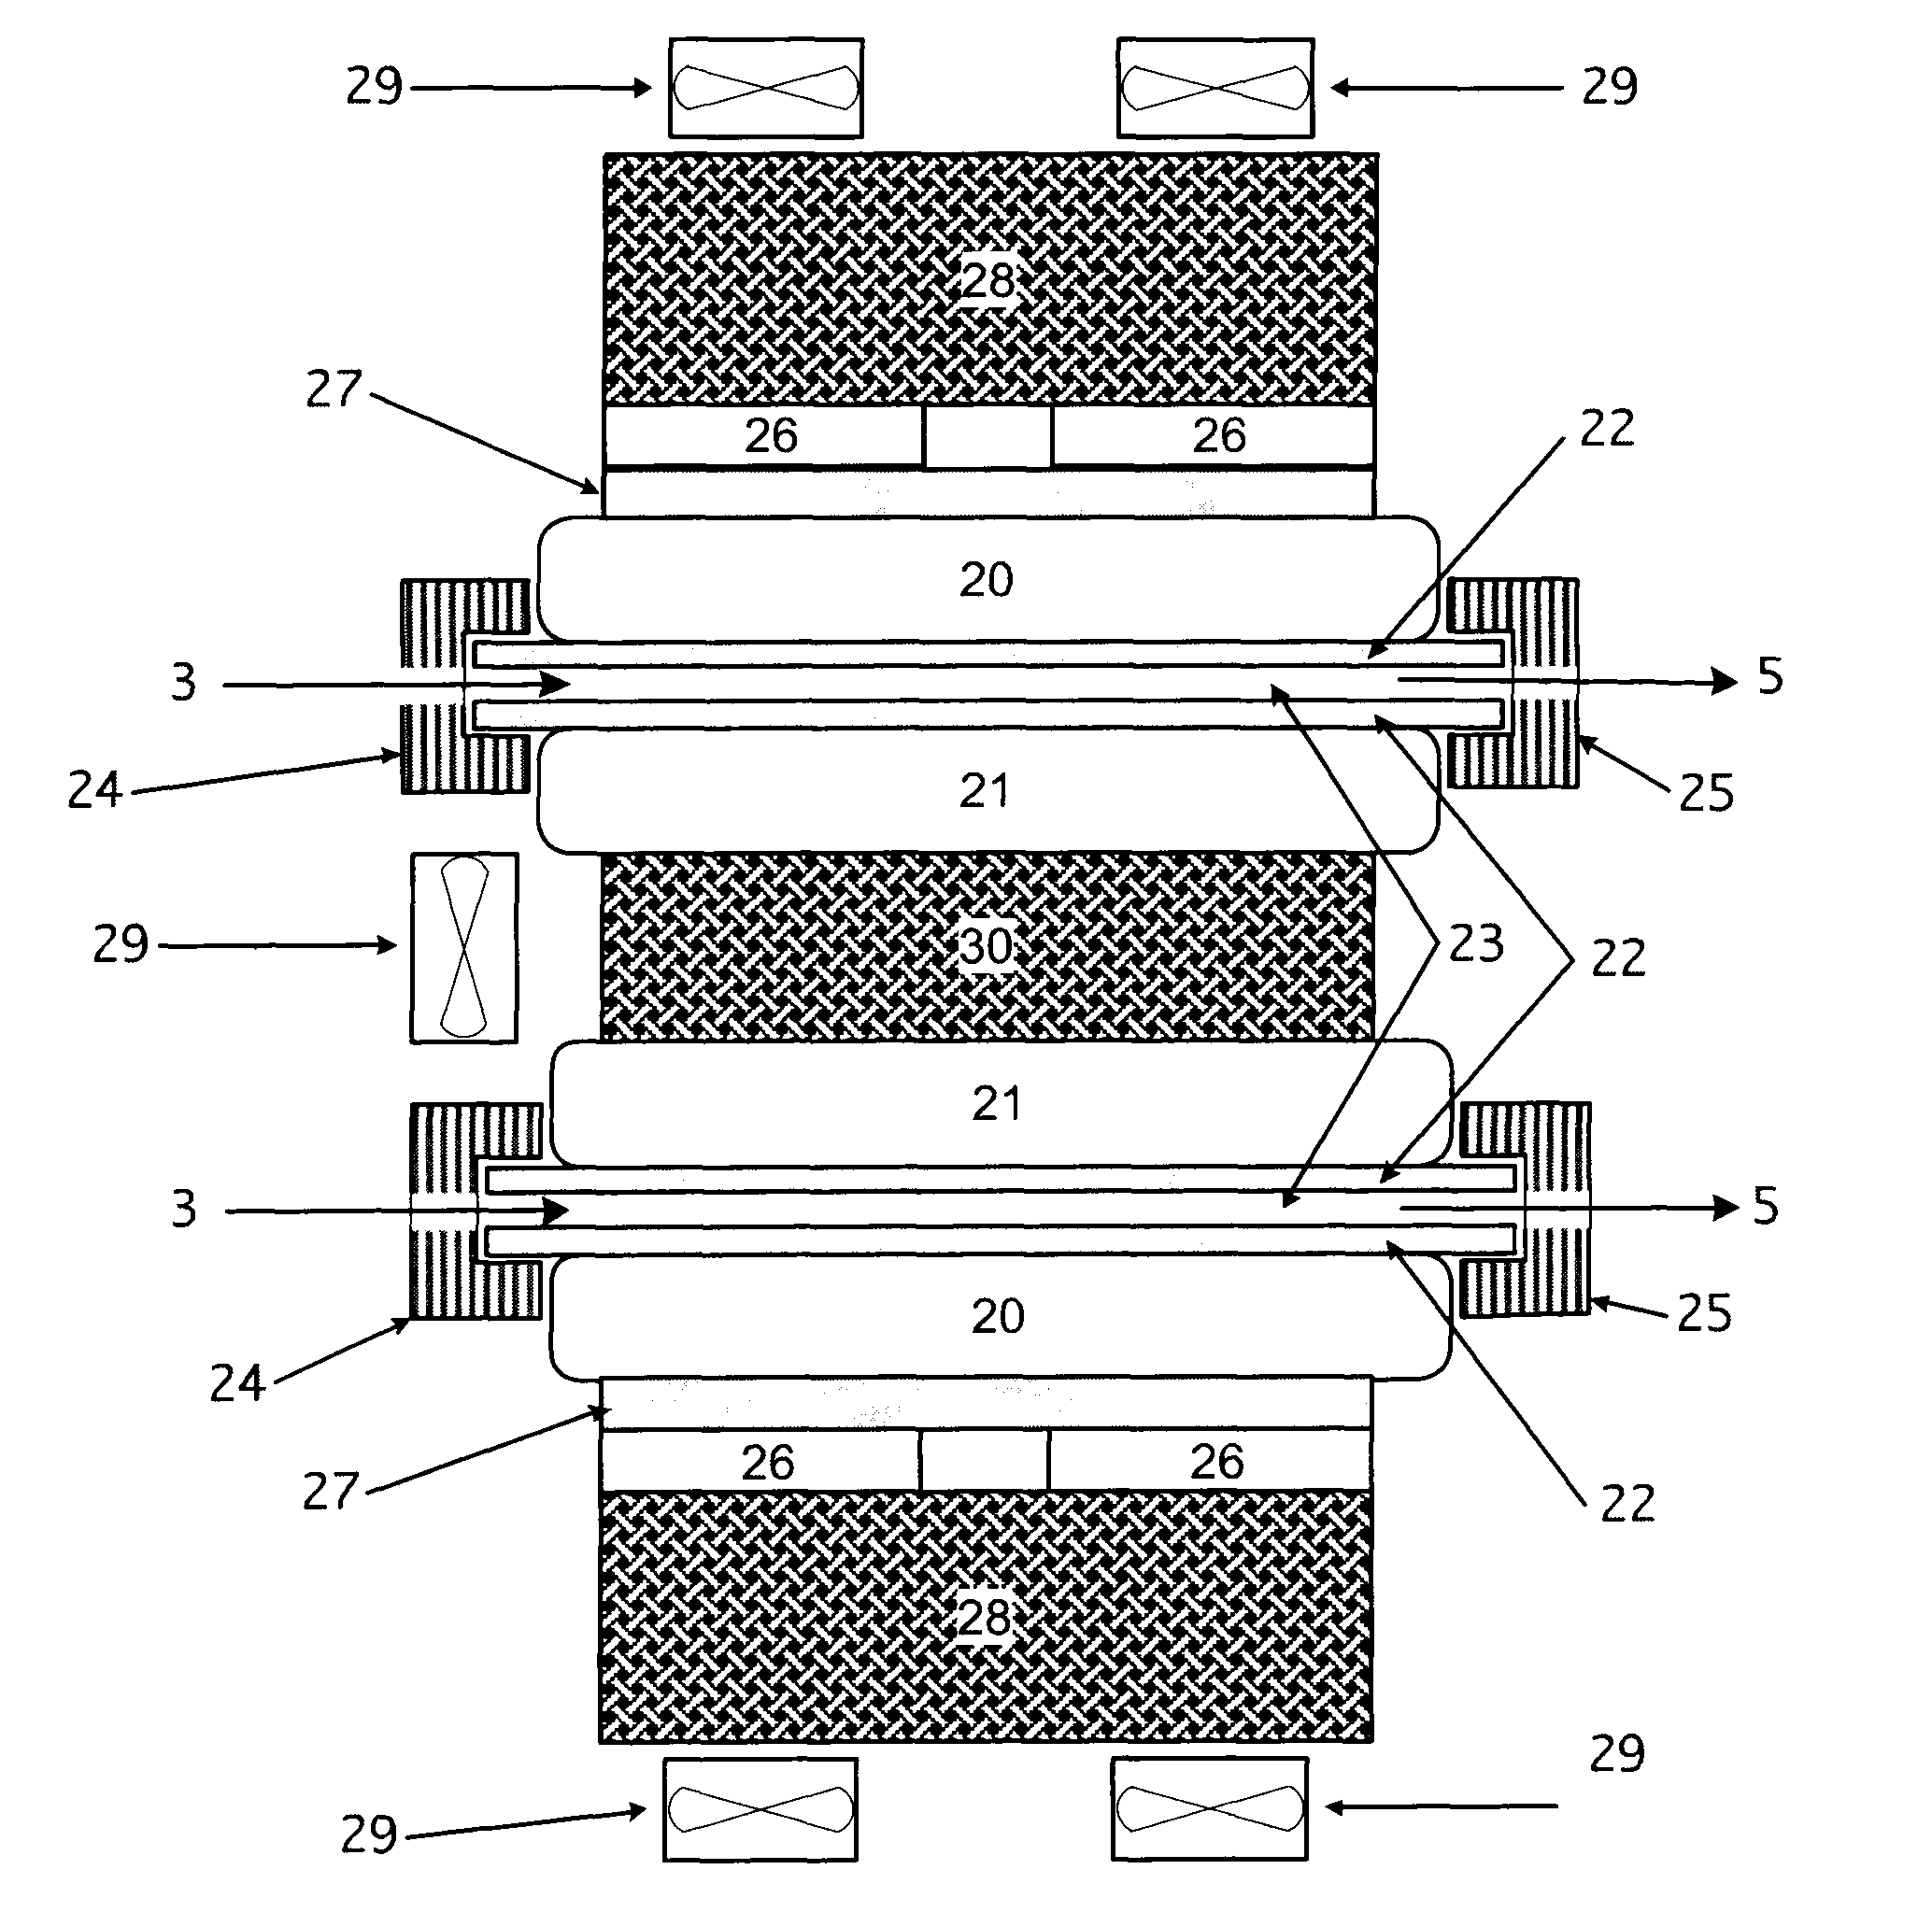 Apparatus for highly efficient cold-plasma ozone production